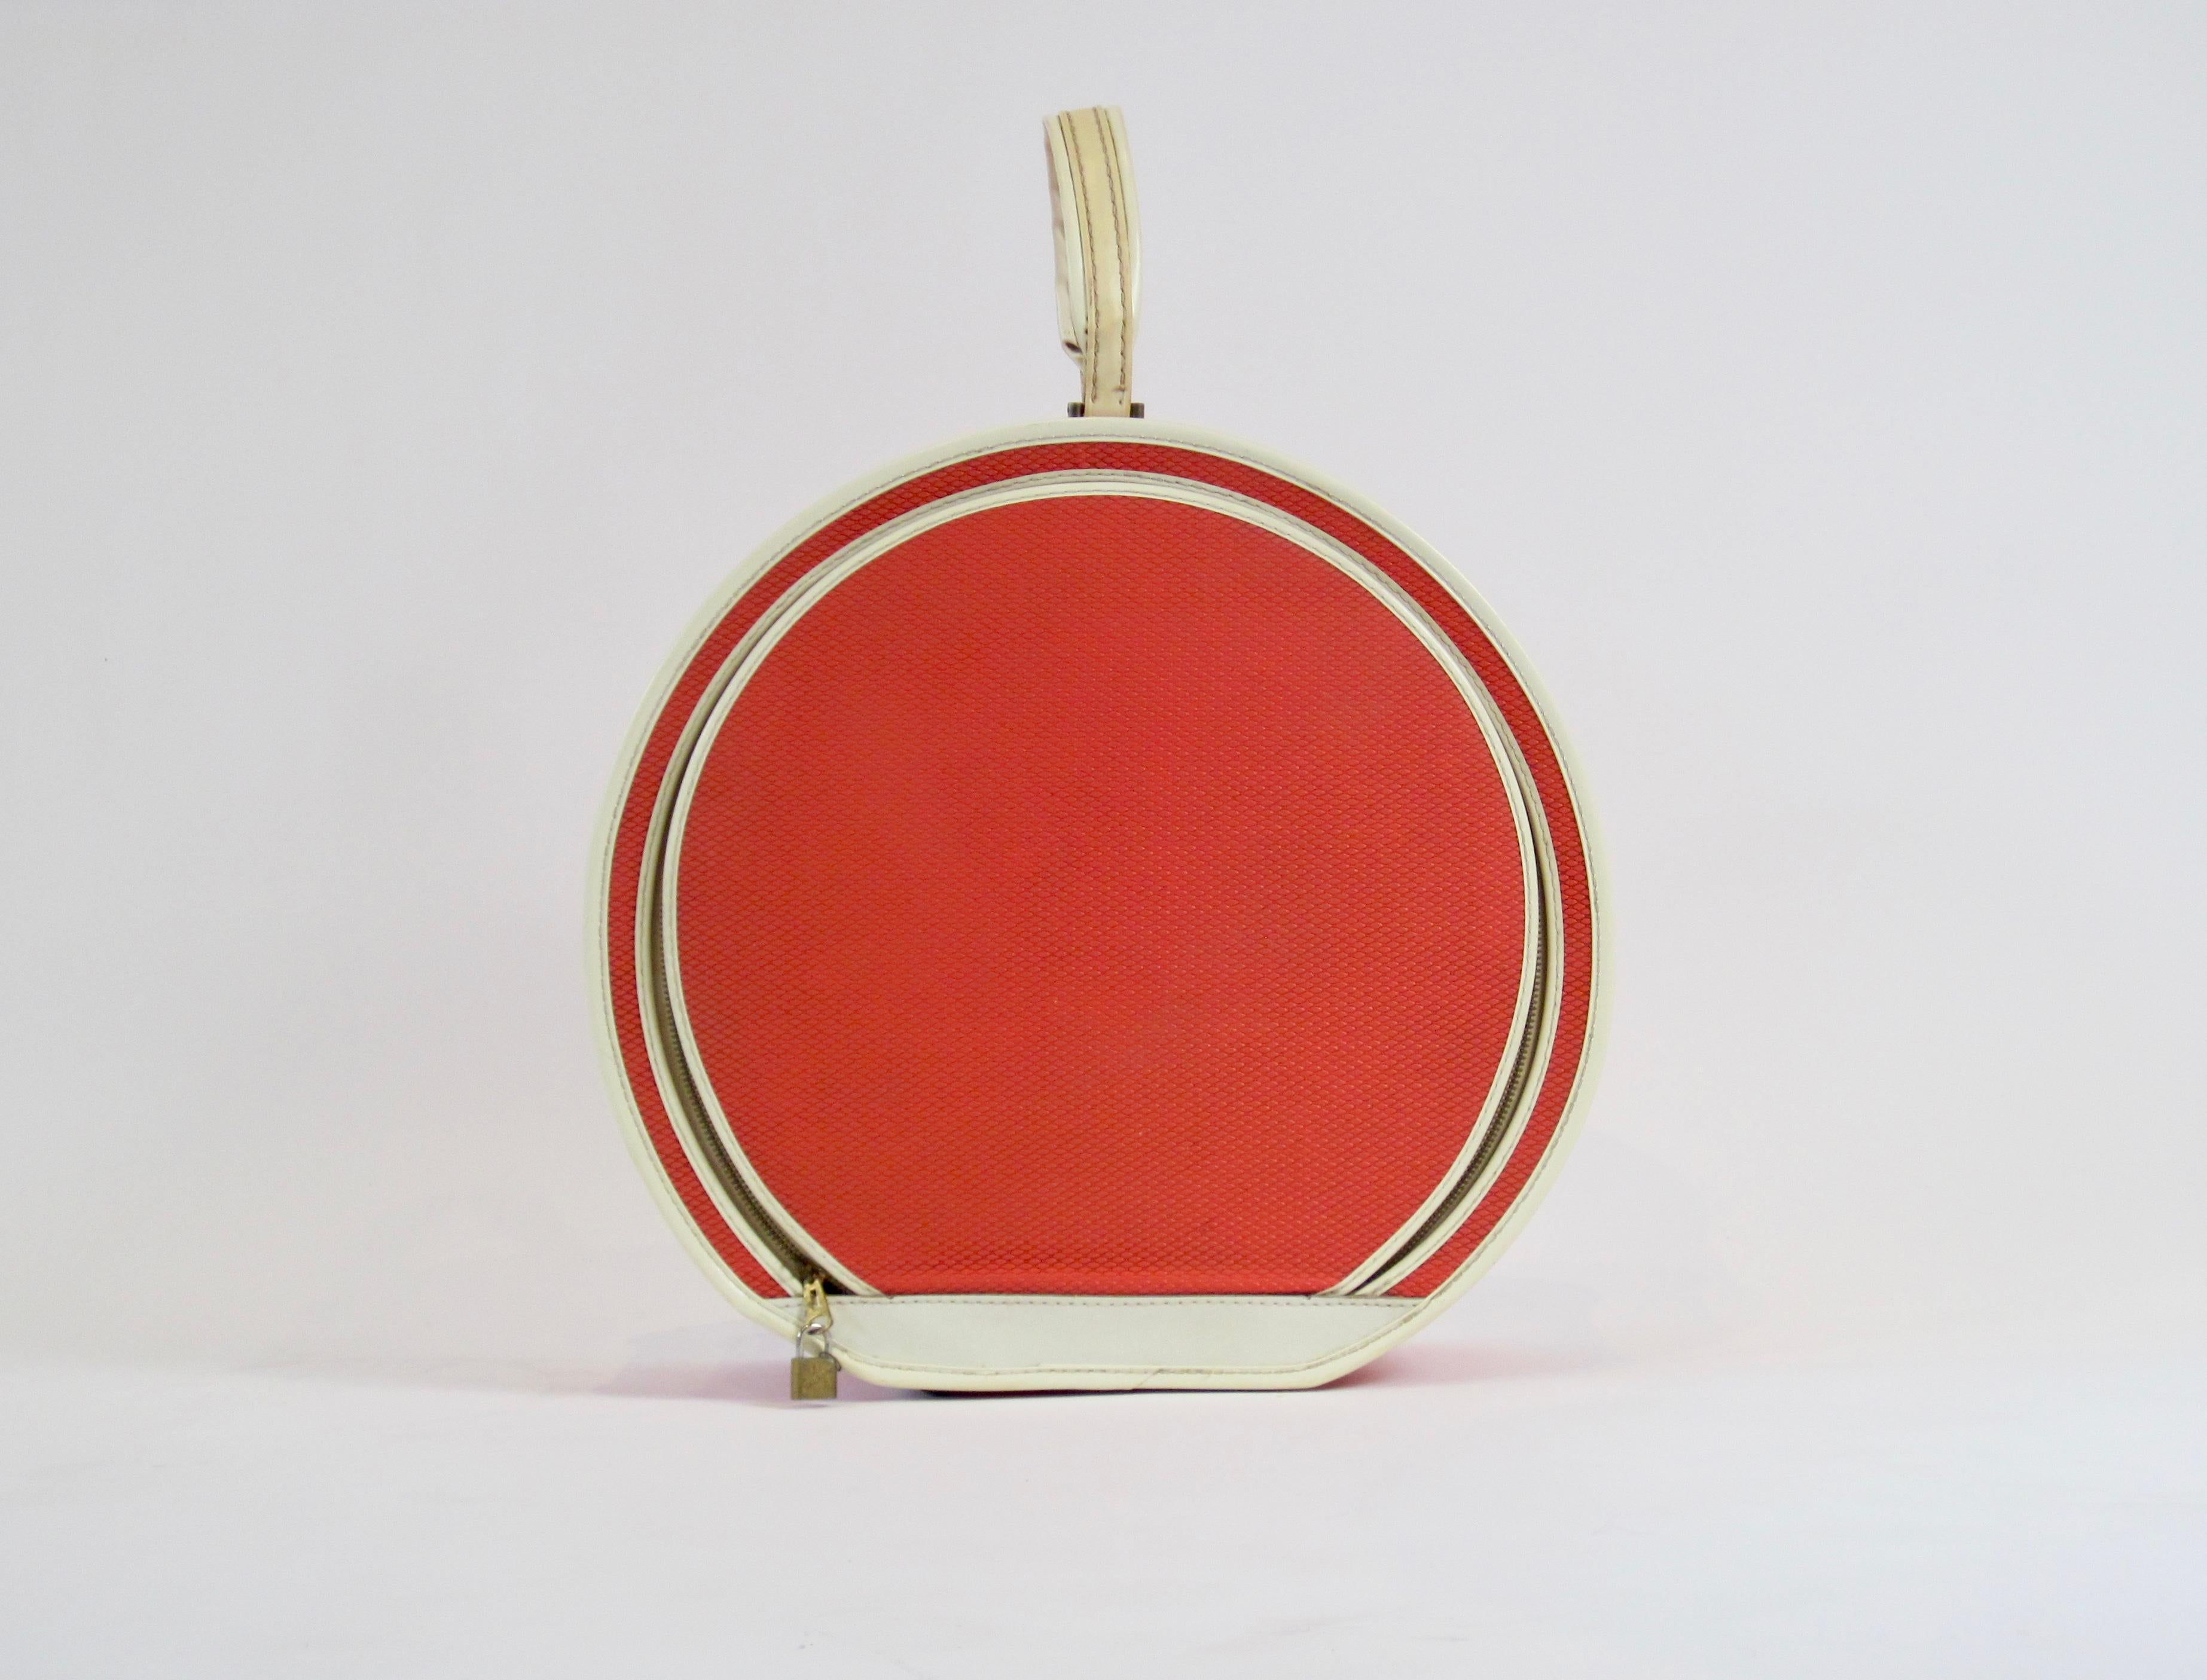 Mid-Century Modern 1950s Mod Coral Red Hat Box Leed's Tested Travelwear Luggage Prop For Sale